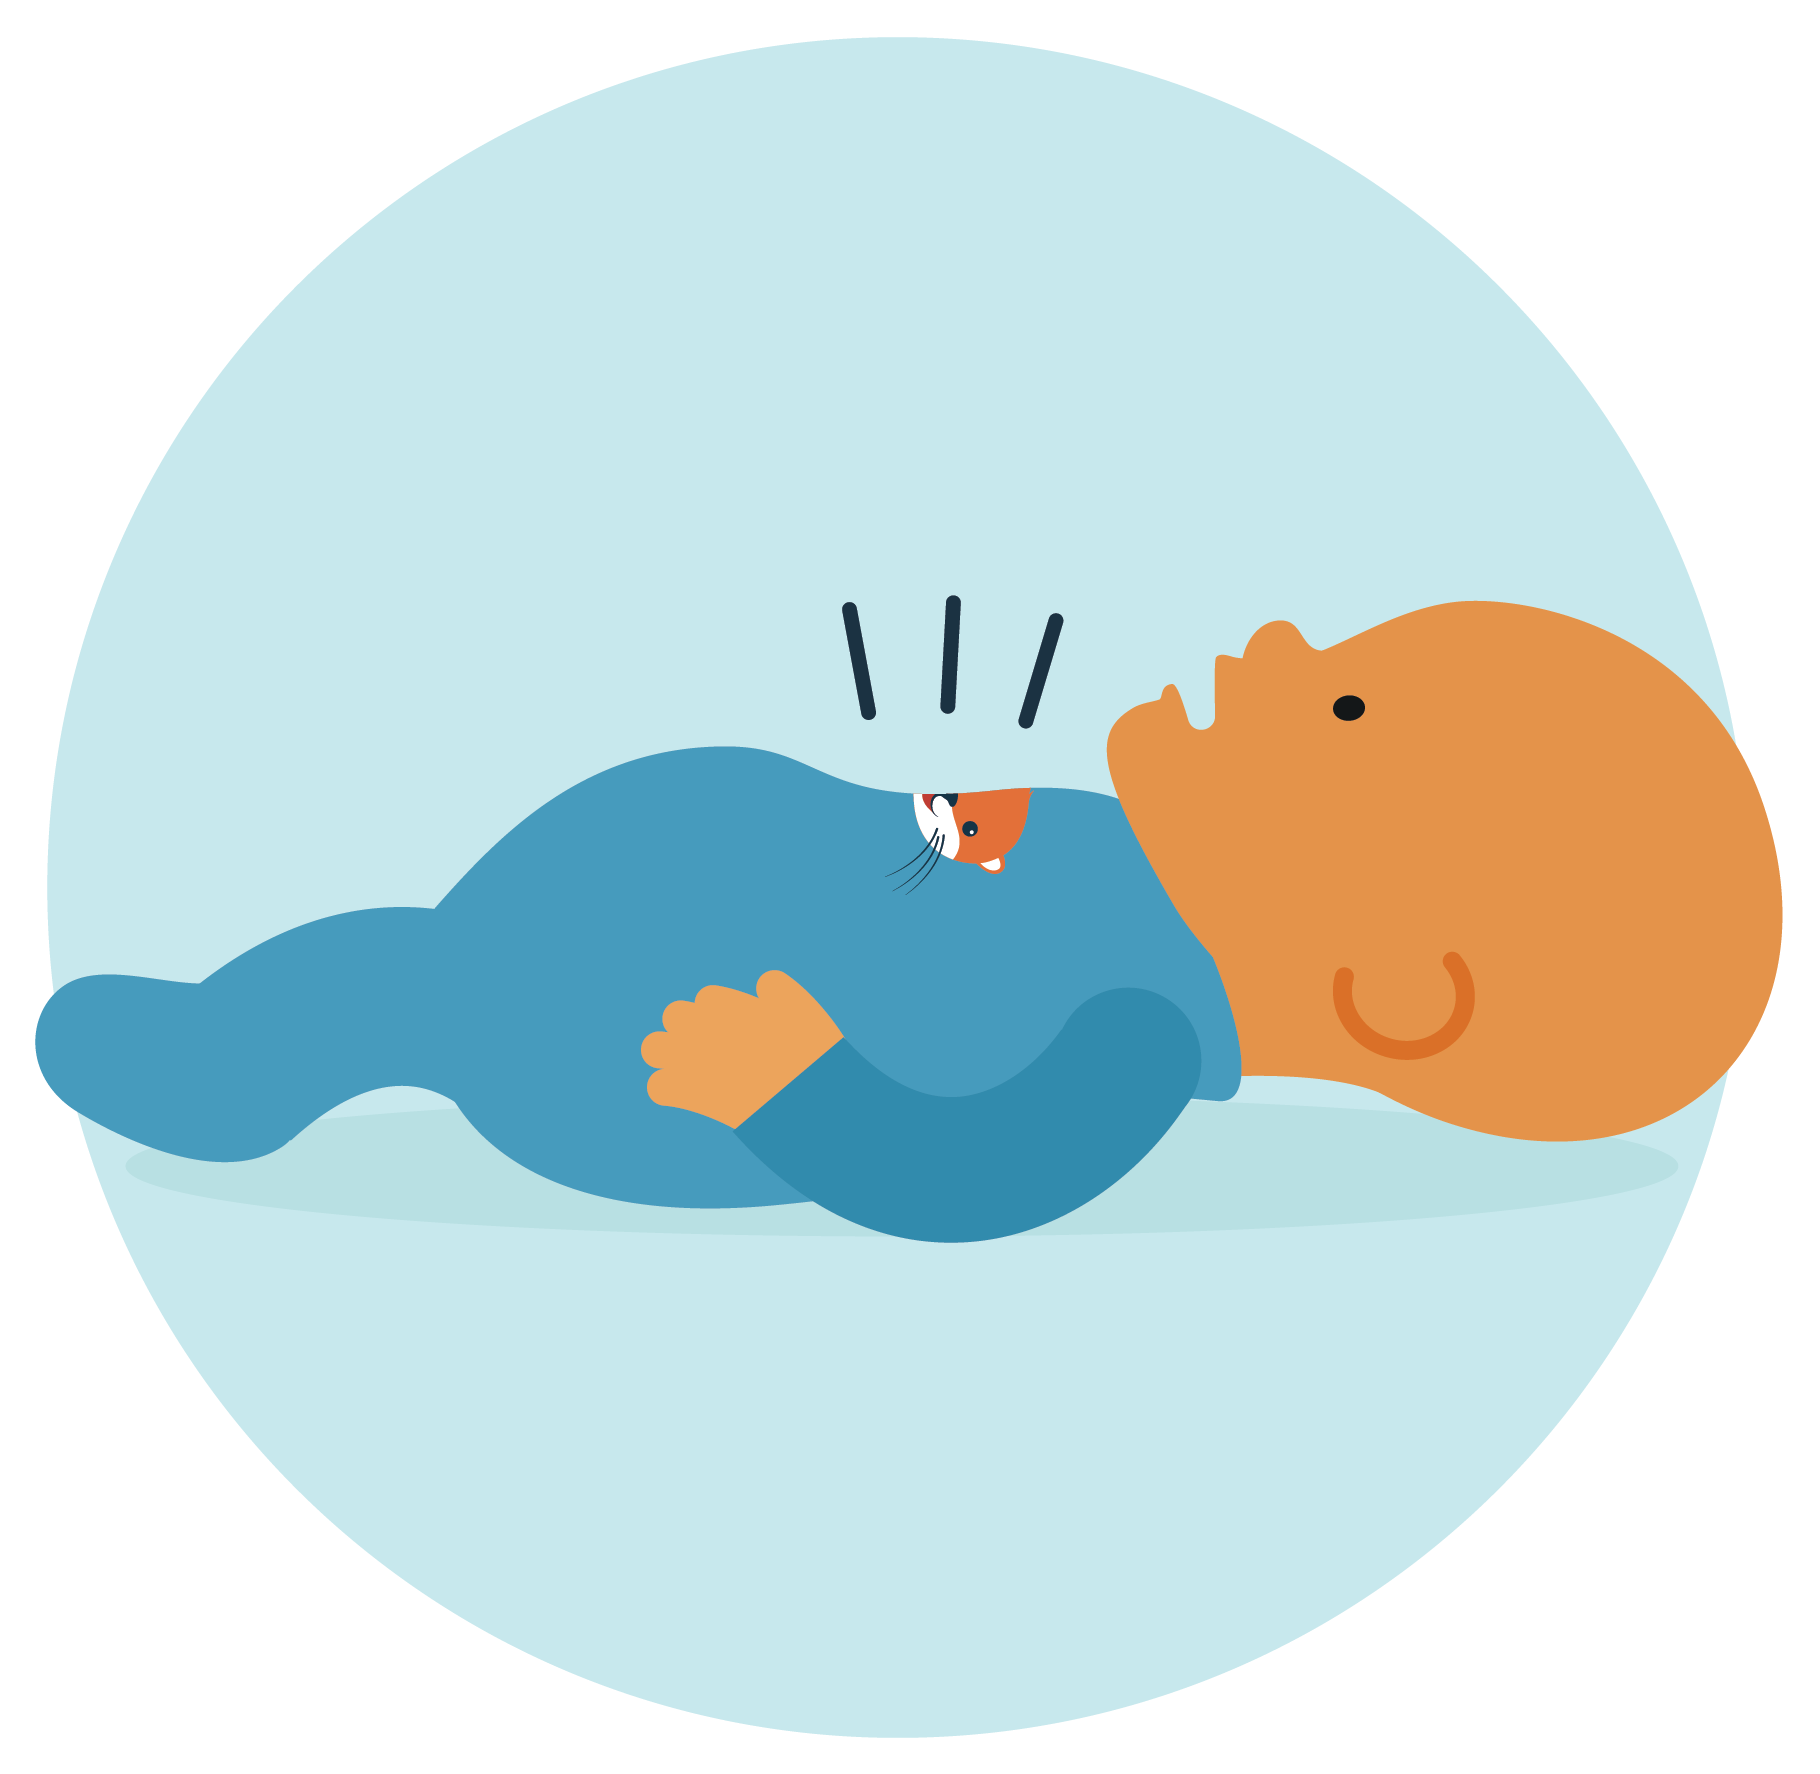 Key signs and symptoms of infection in babies - difficulty breathing, breathing fast or noisily, 'sucking in' under the ribs, grunting or wheezing